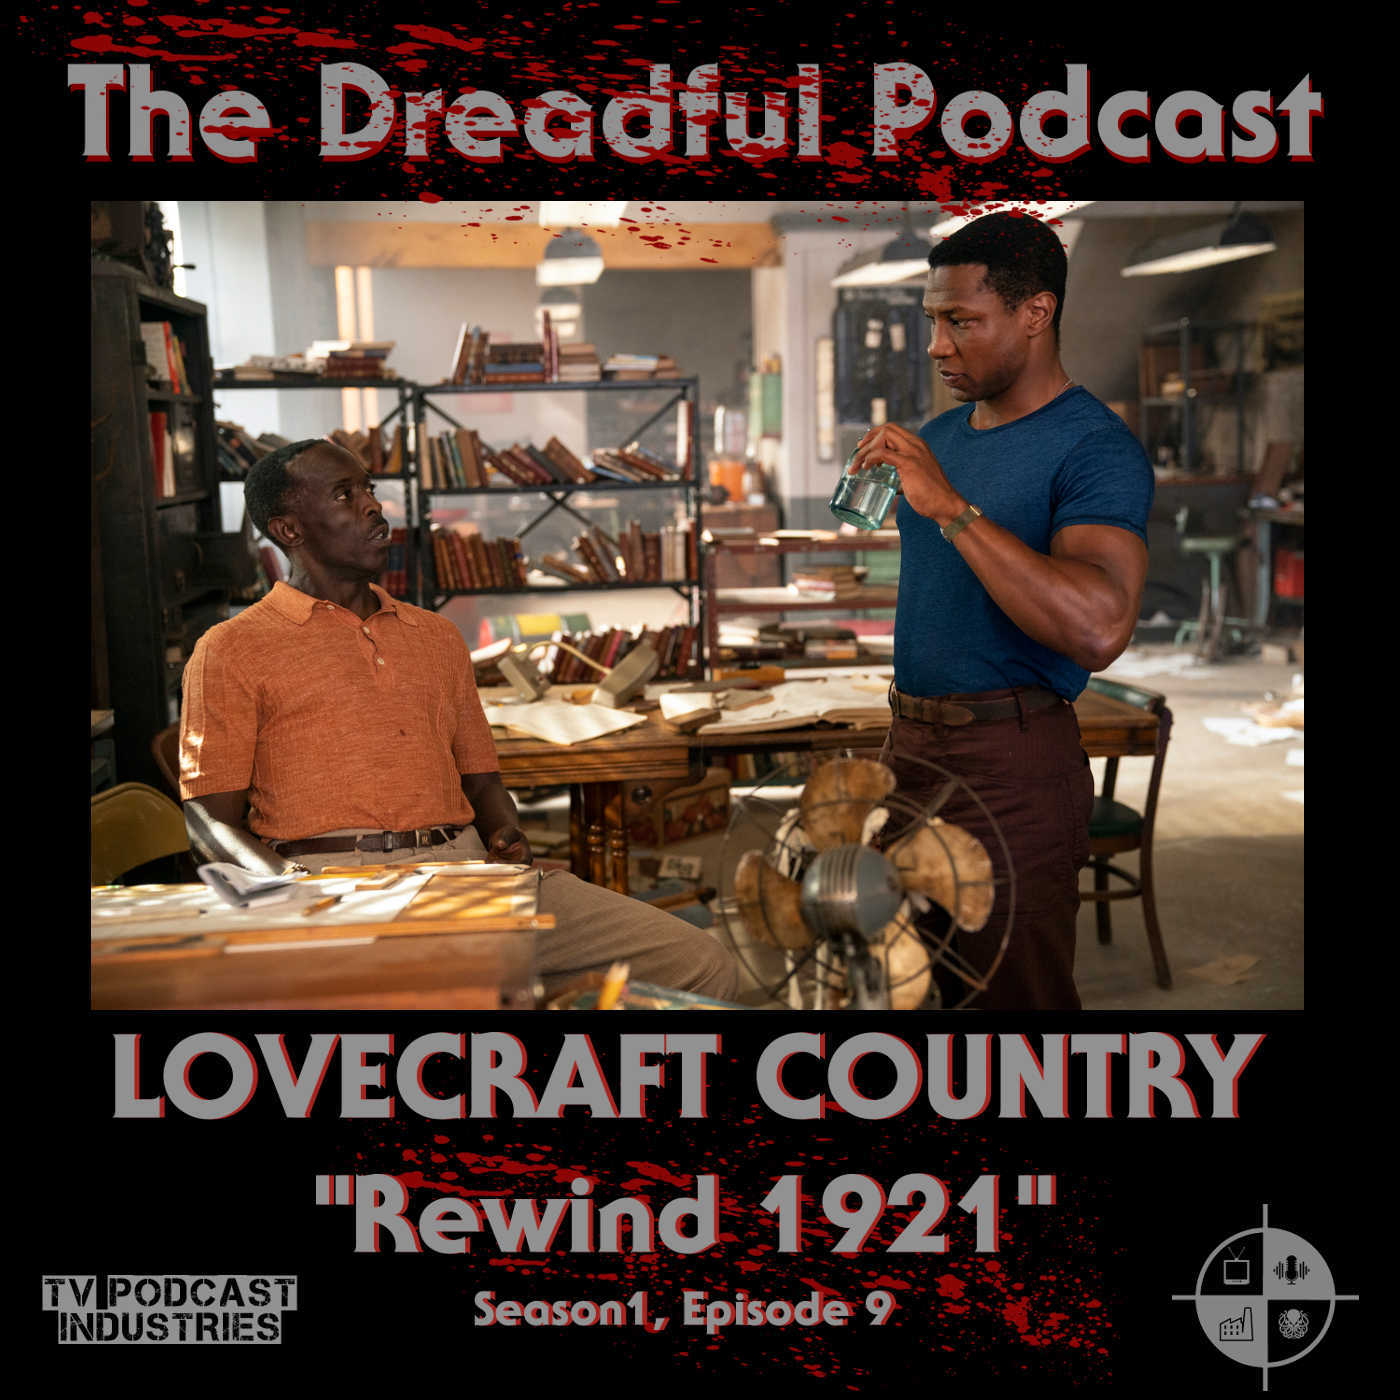 Lovecraft Country Episode 9 “Rewind 1921” Review